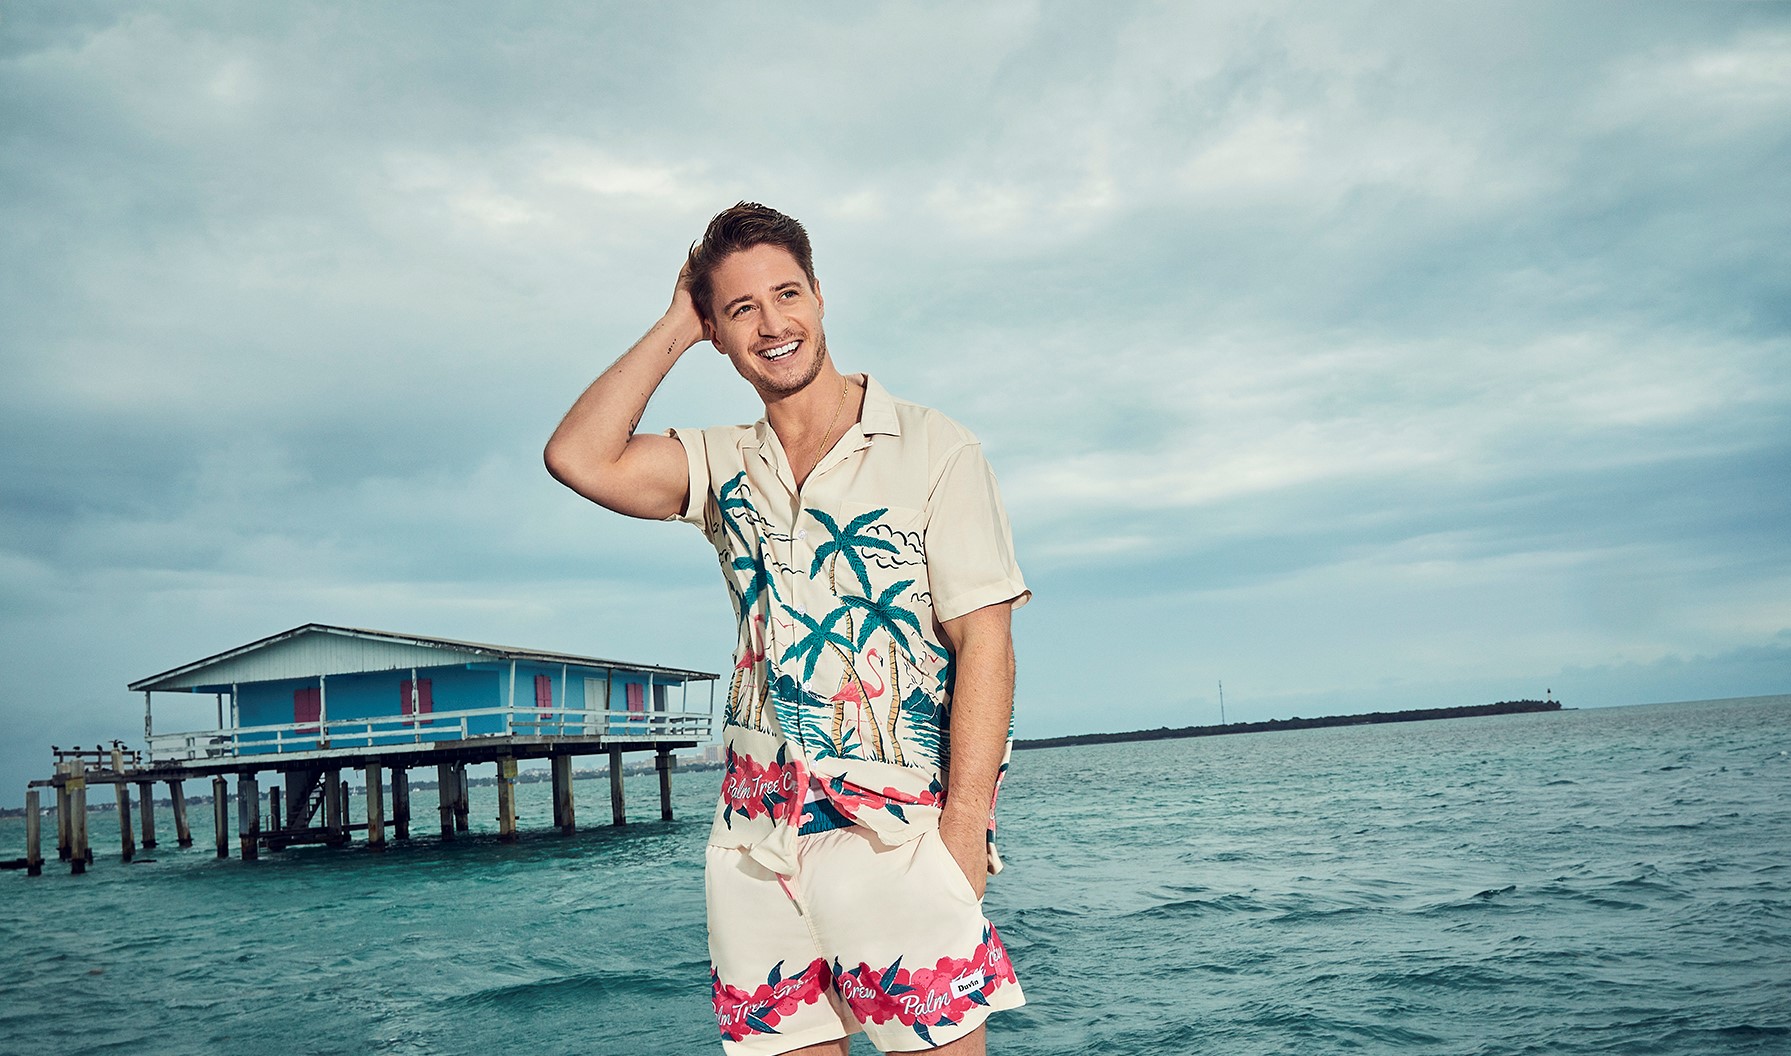 kygo models his fashion collection with duvin design co.